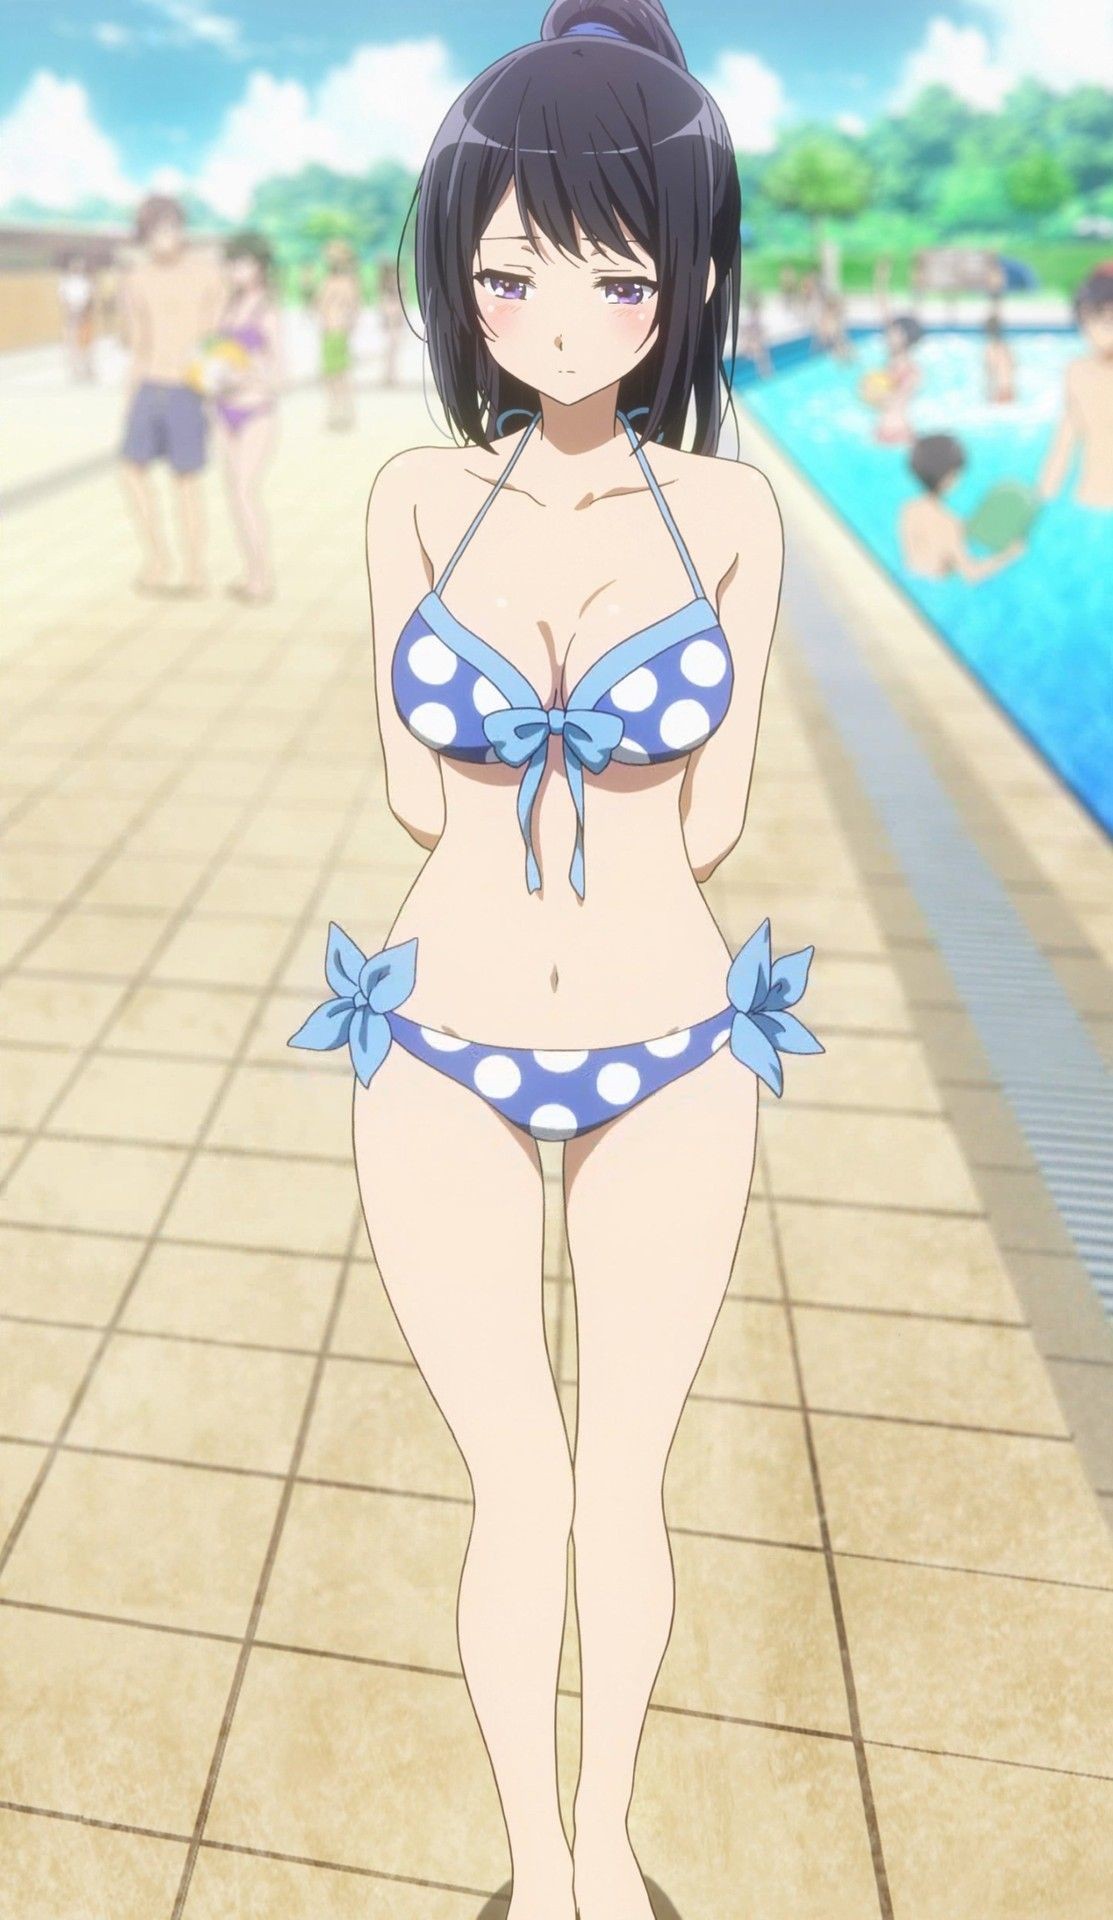 Office Sex [Image] "resound! Euphonium 2 ' 2 Story, Rena's Big Breasts Swimsuit Appearance エロッォオオオ! Hot Couple Sex